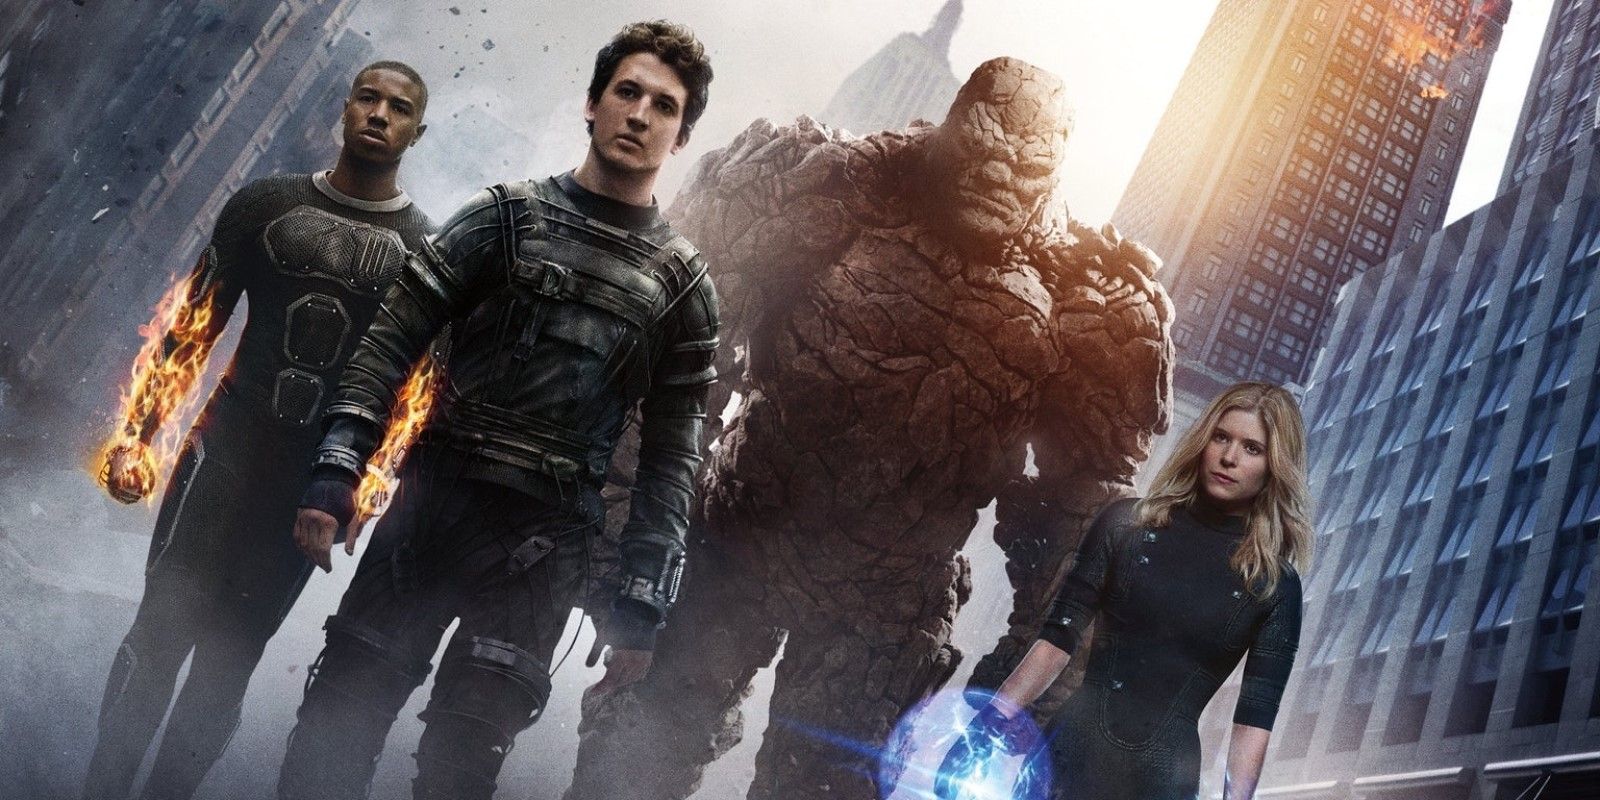 The Fantastic 4 in a promo poster